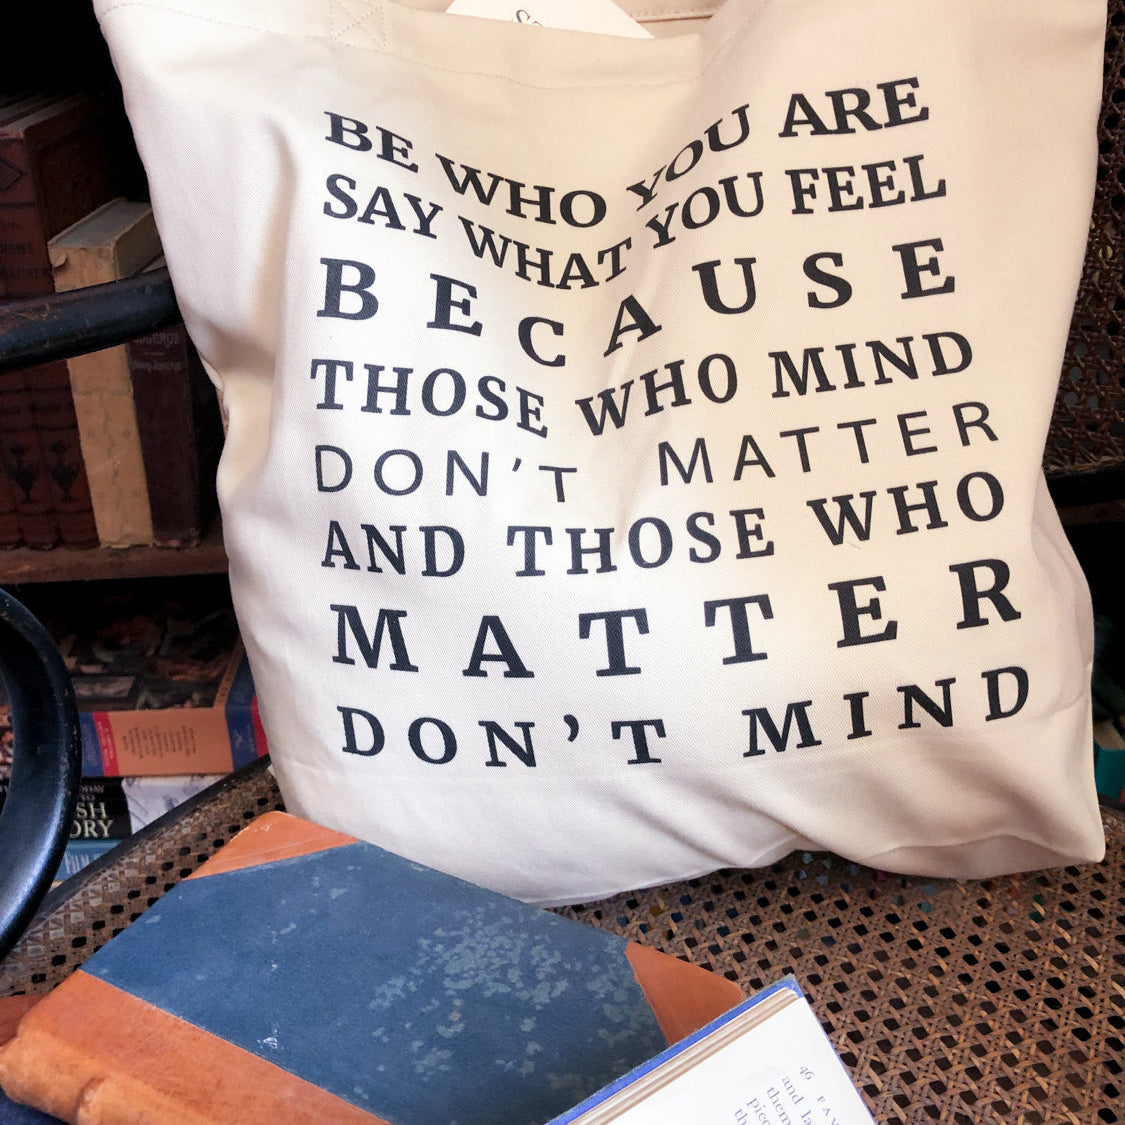 Be Who You Are Dr Seuss Quote Tote Bag - BookQuoteDecor